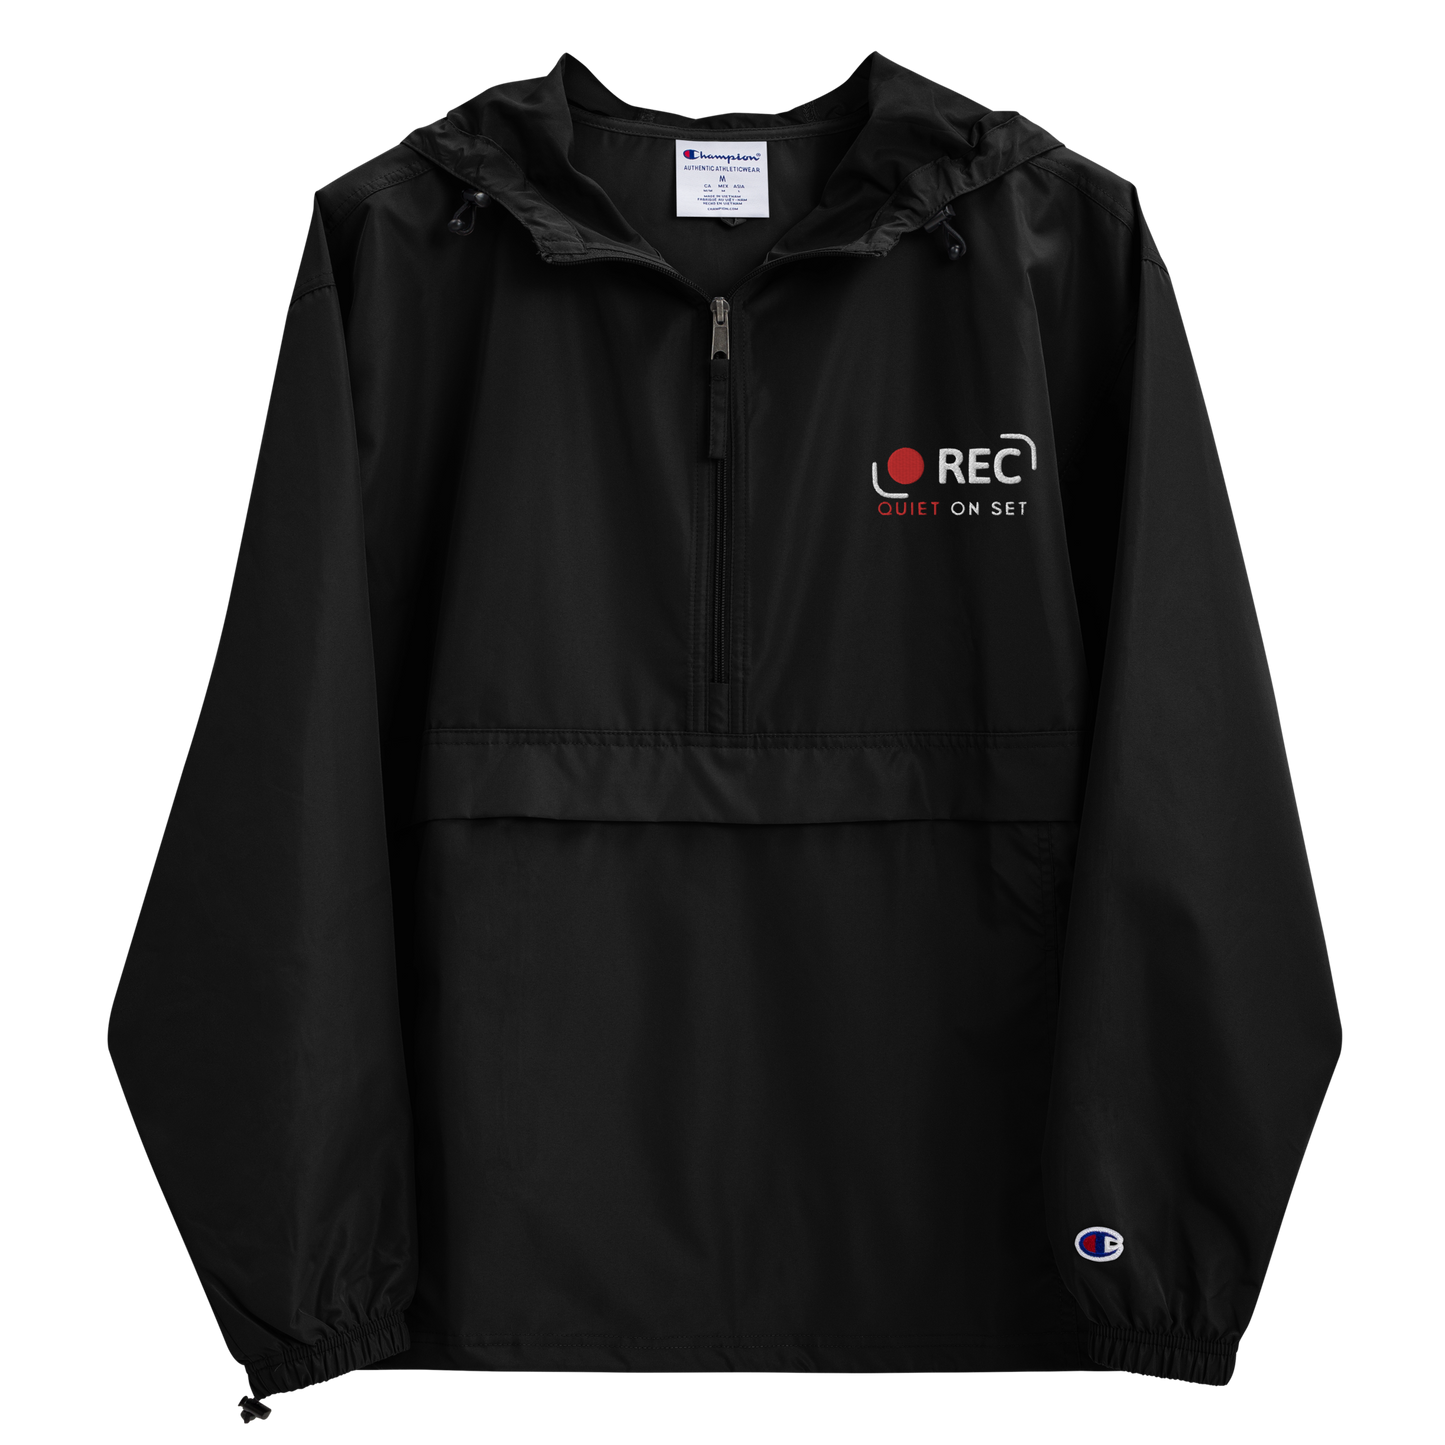 REC - Quiet On Set - Embroidered Champion Packable Jacket (Variant B)